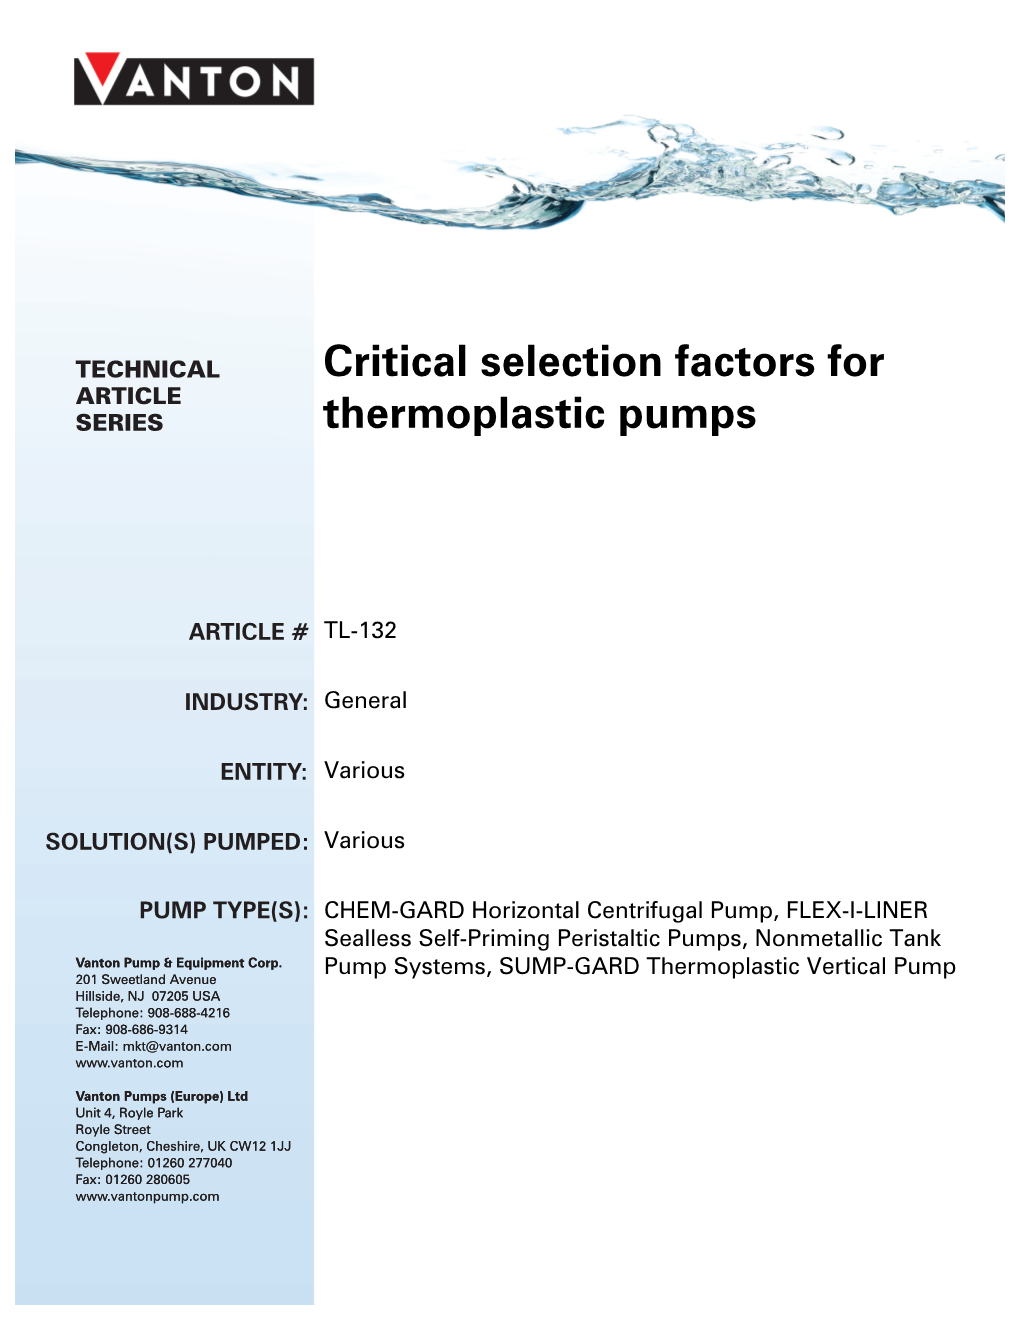 Critical Selection Factors for Thermoplastic Pumps